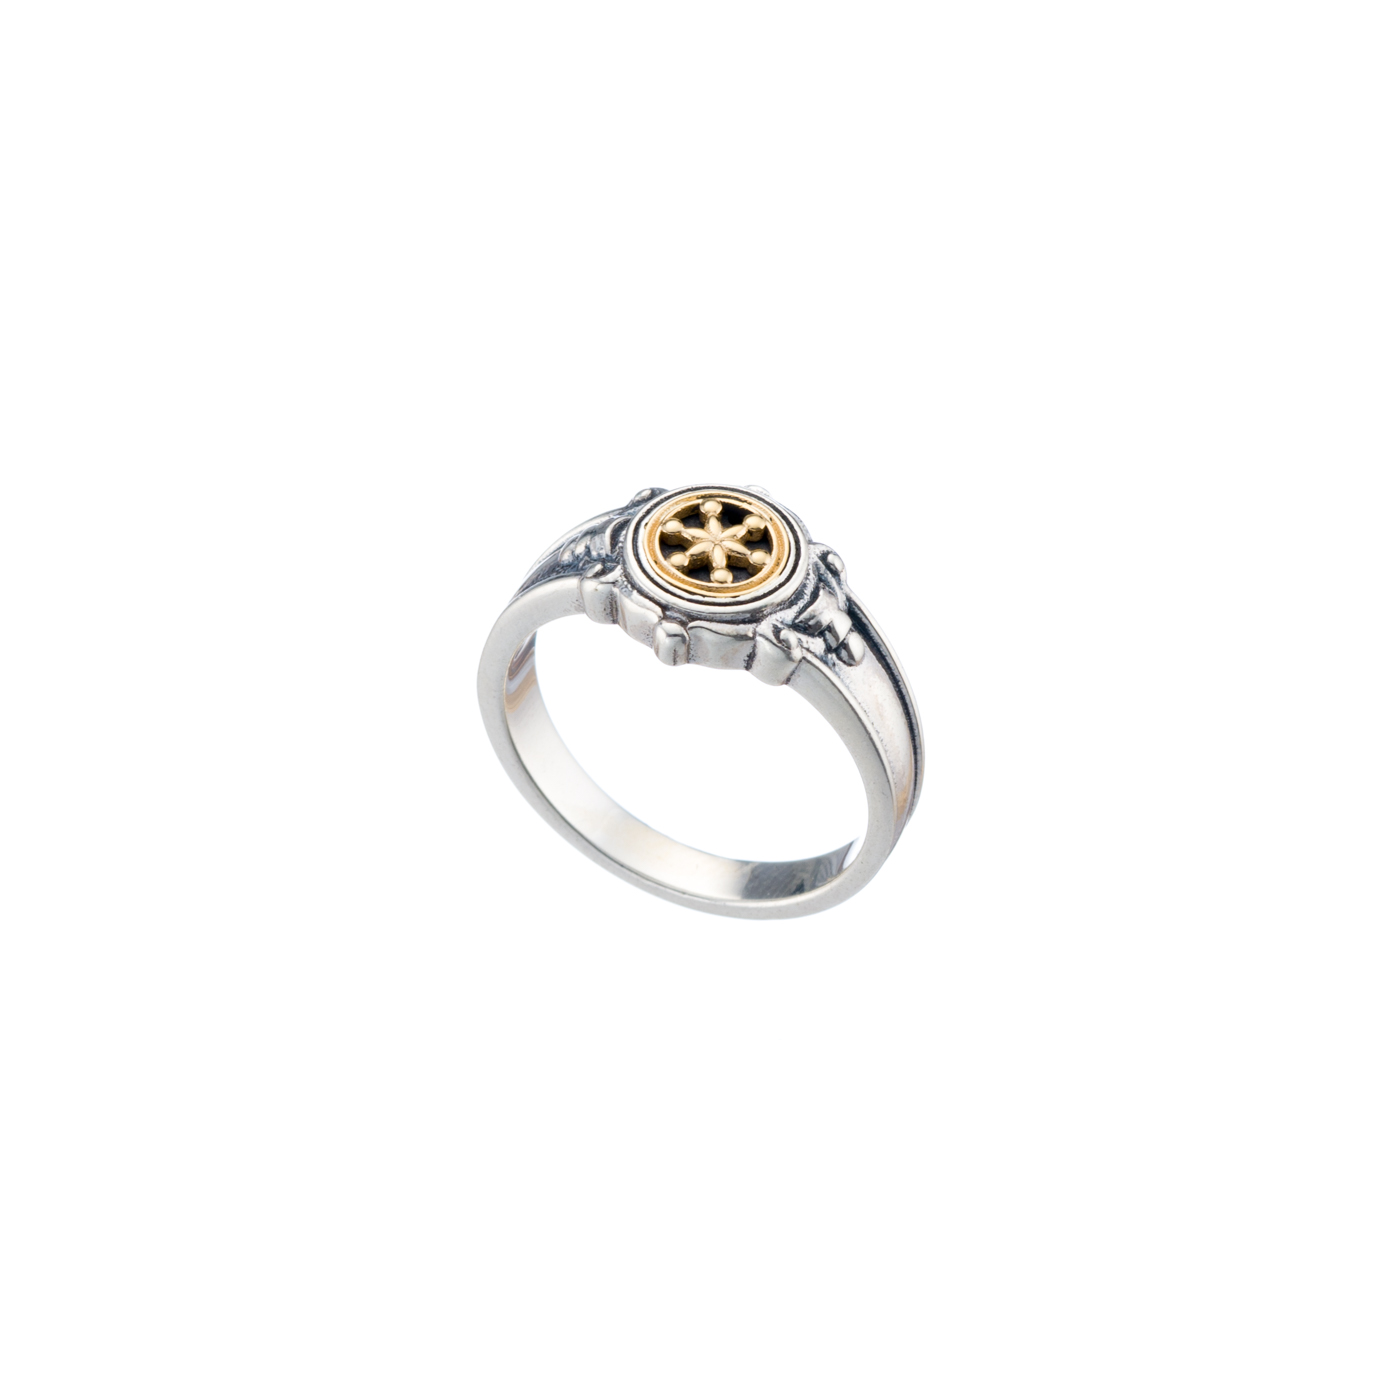 Symbol ring in 18K Gold and Sterling silver